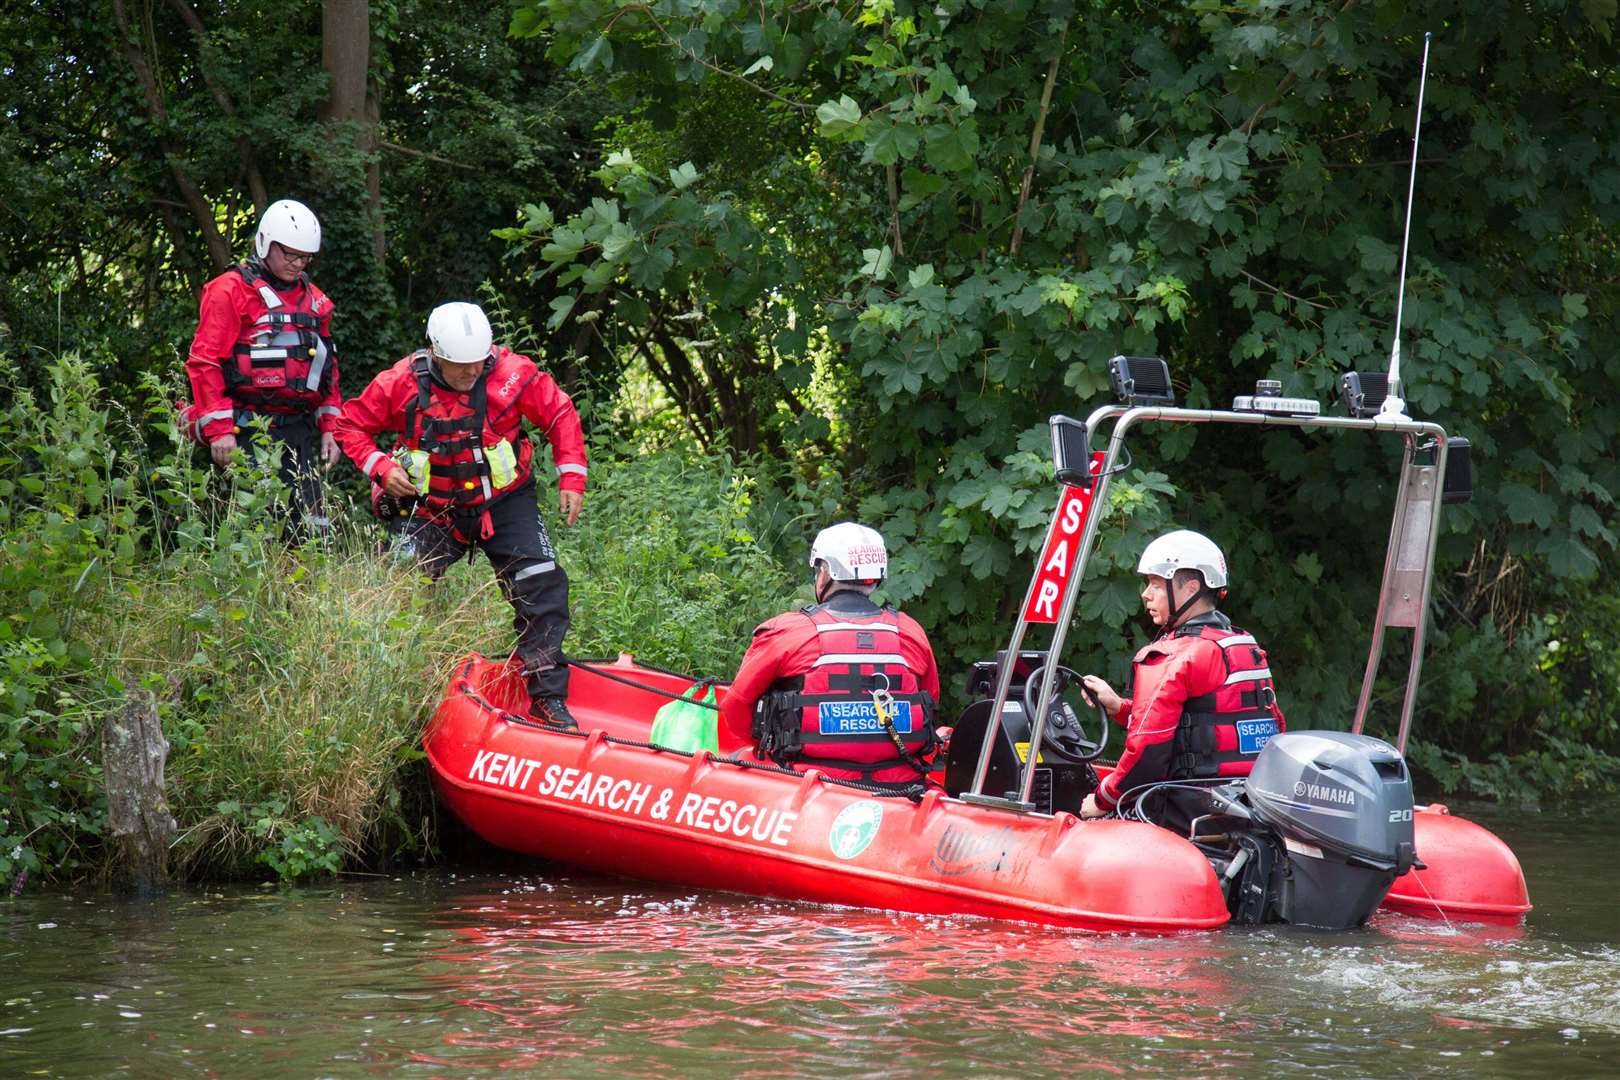 Kent Search and Rescue spend a lot of time in dangerous water